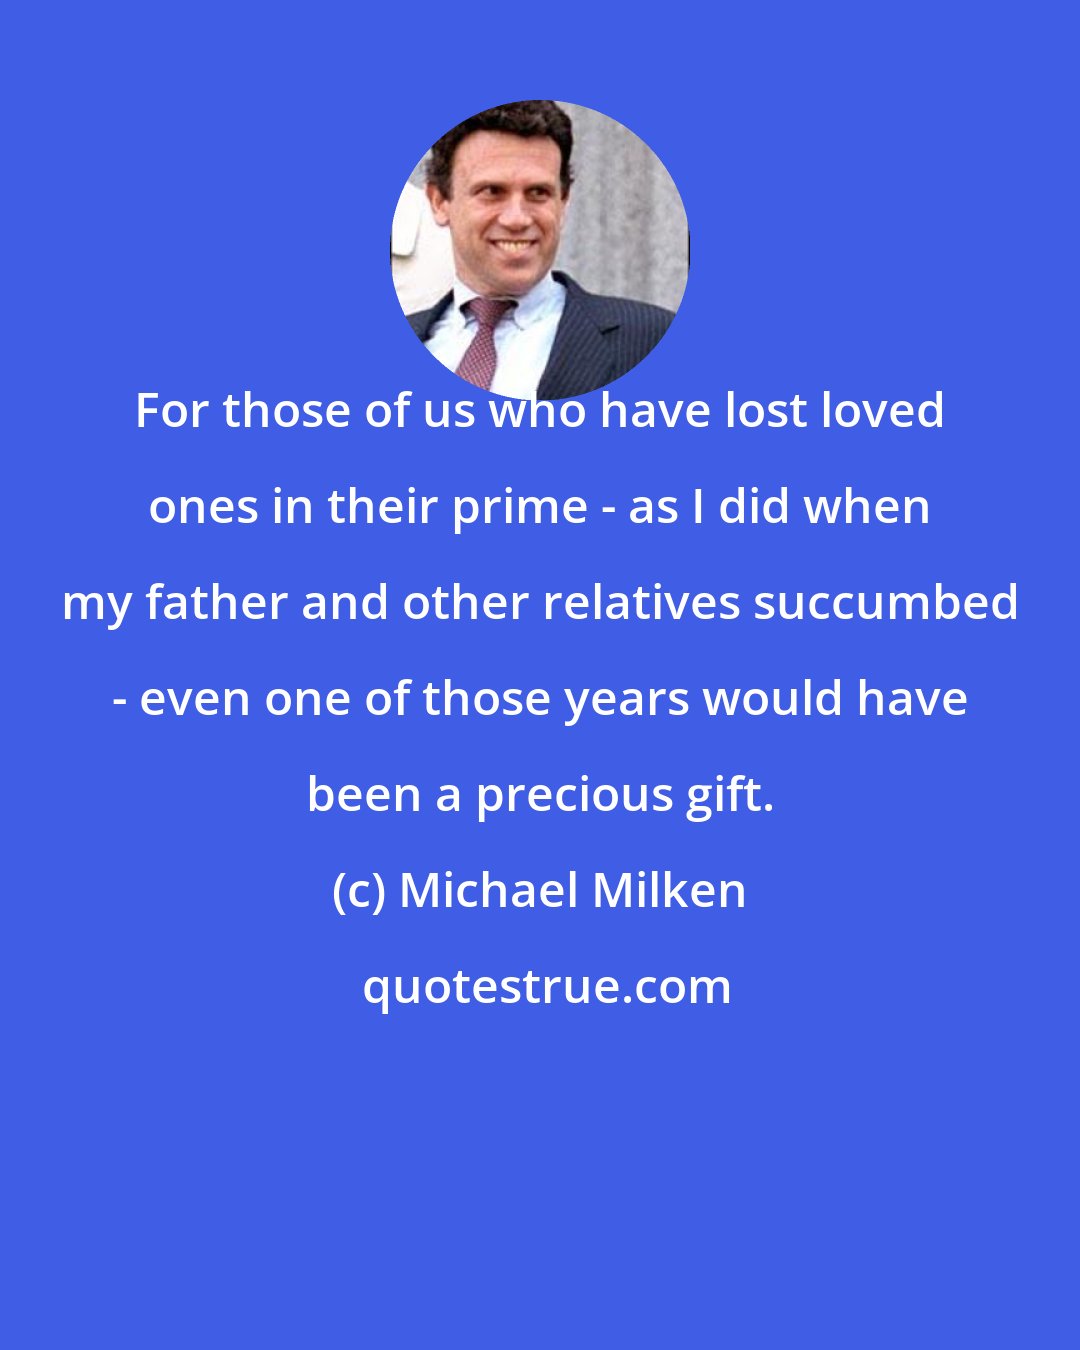 Michael Milken: For those of us who have lost loved ones in their prime - as I did when my father and other relatives succumbed - even one of those years would have been a precious gift.